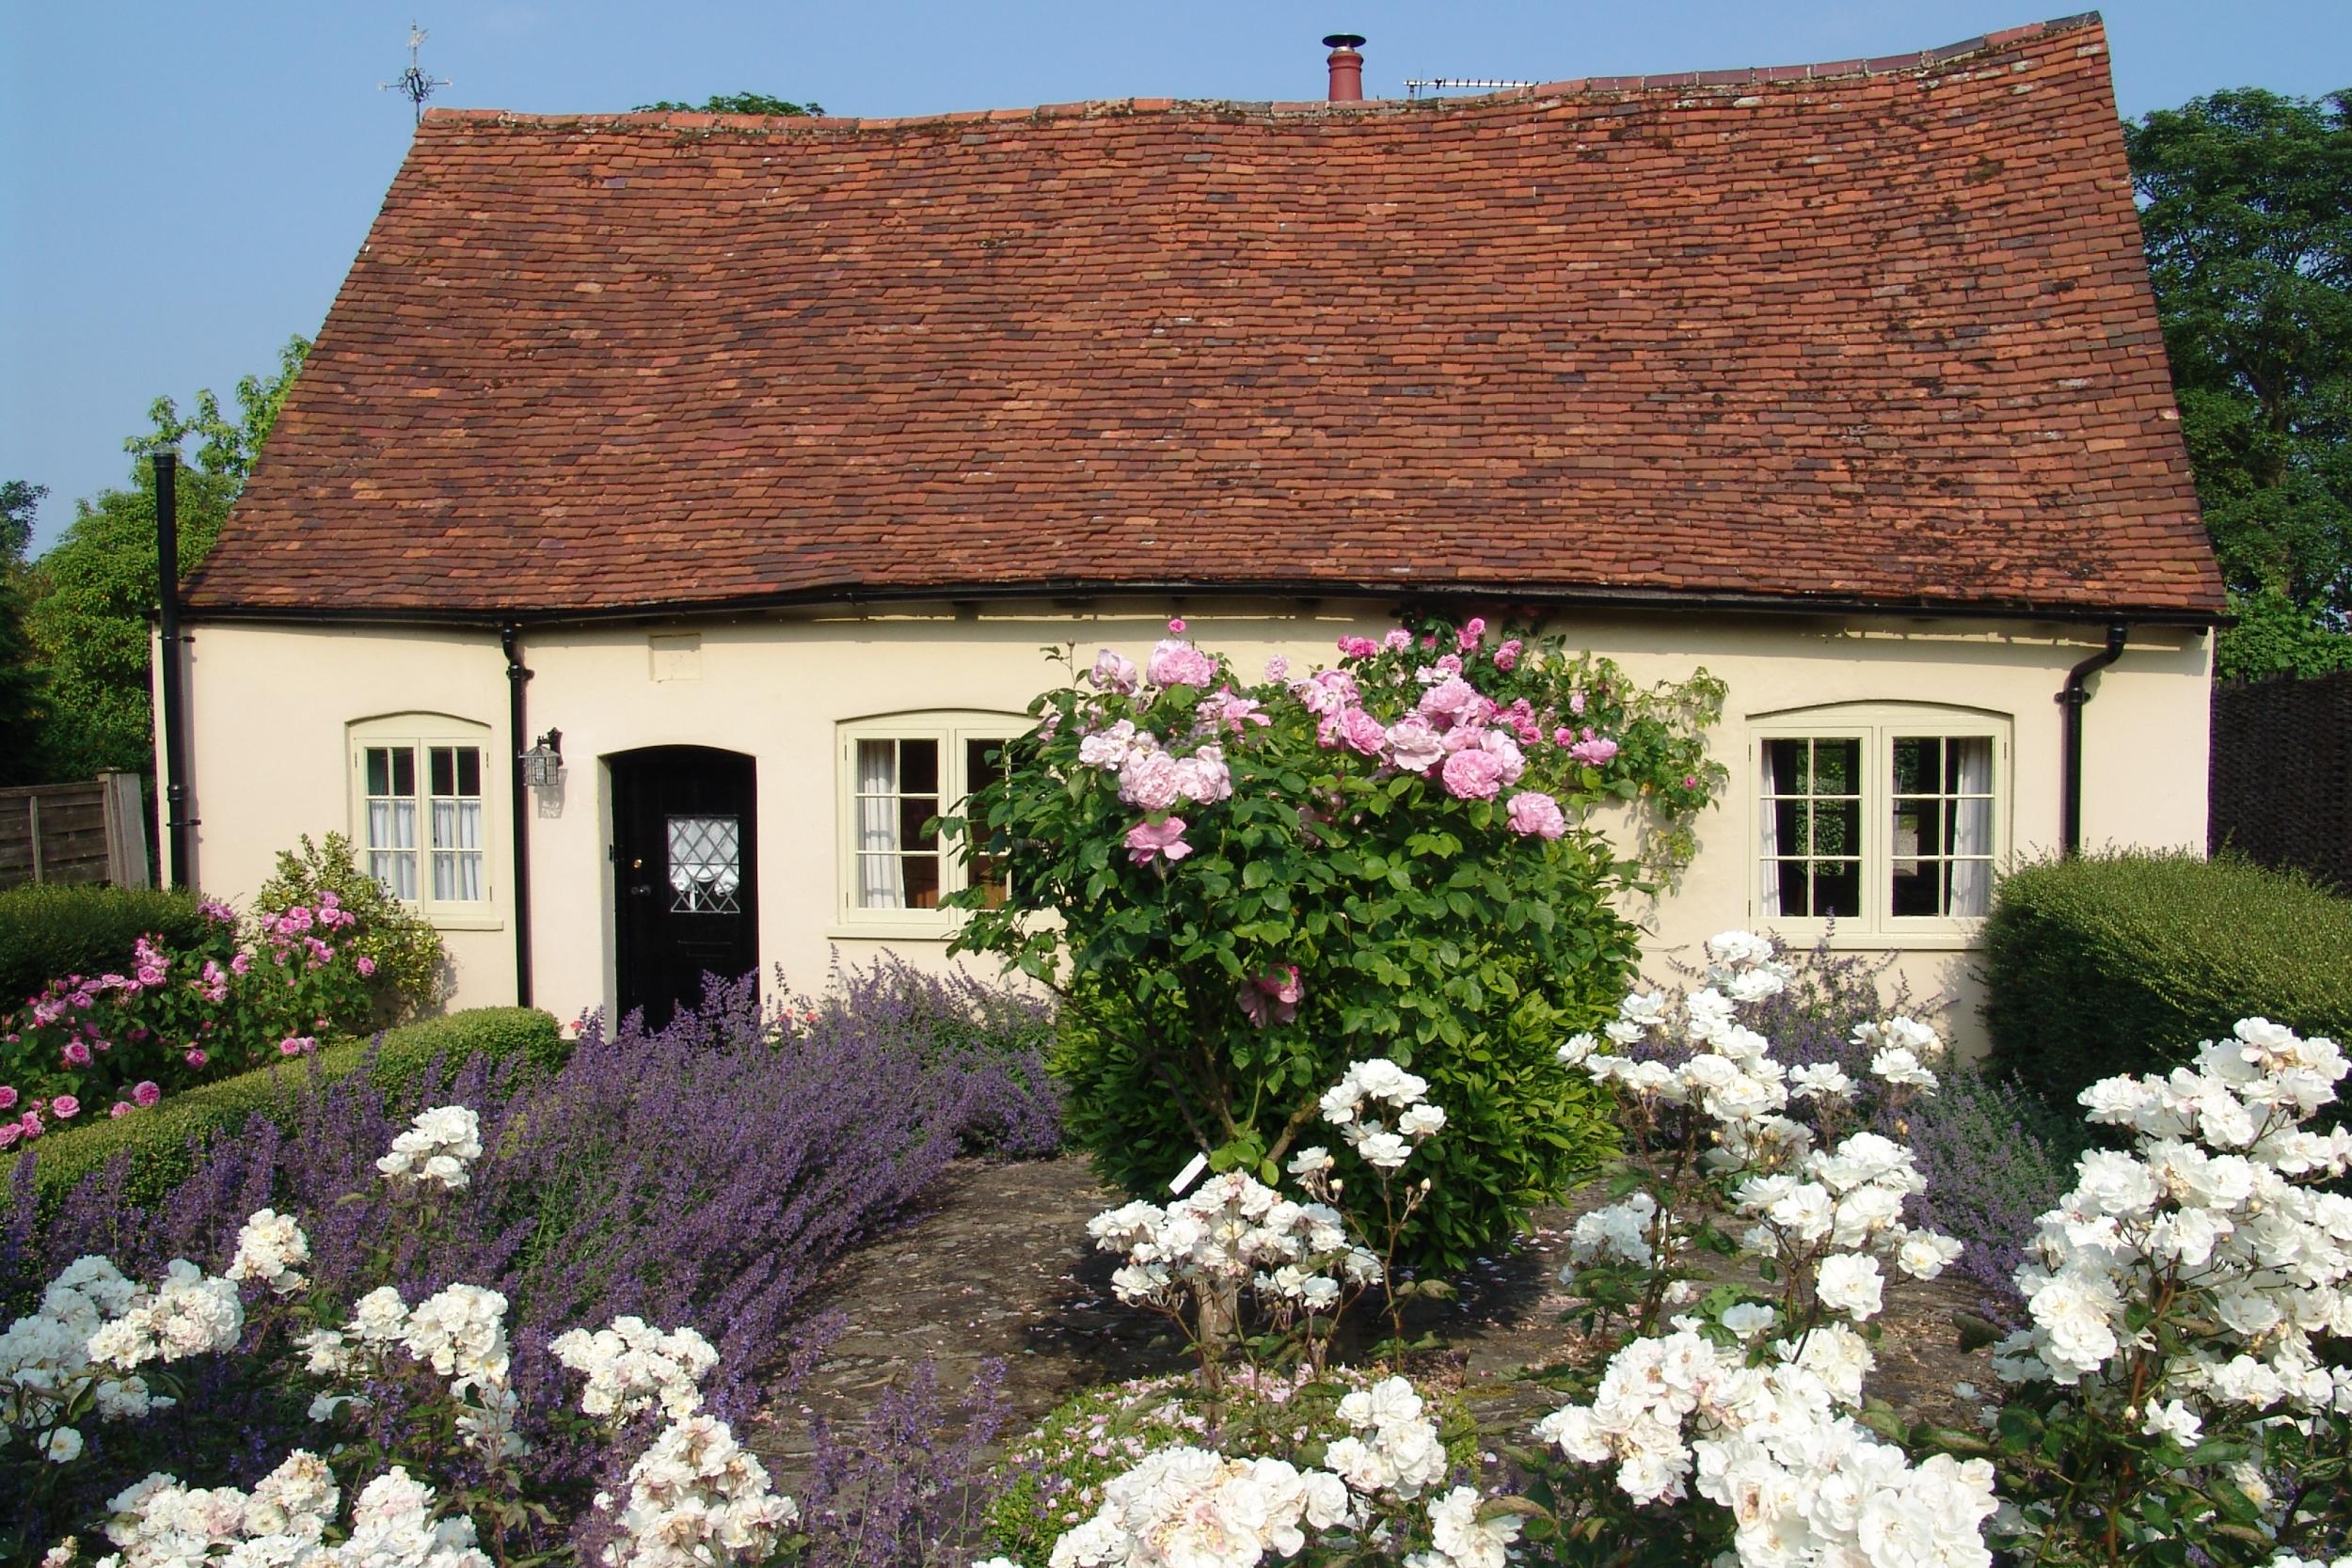 Blaize Barn is a grade II-listed cottage